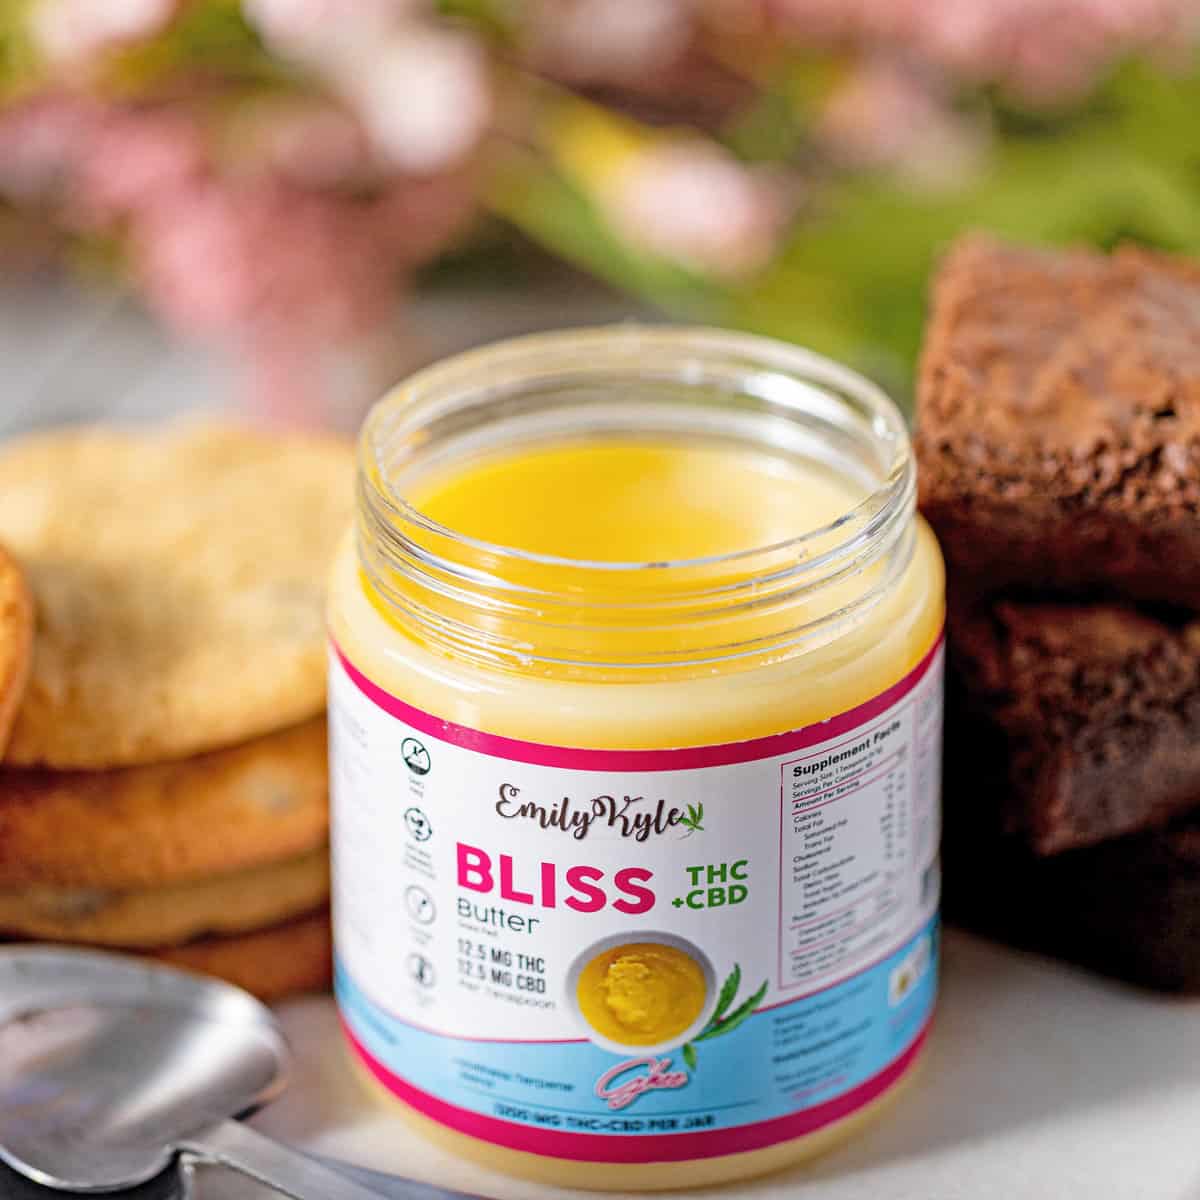 A picture of Emily Kyles Bliss Cannabutter for sale.